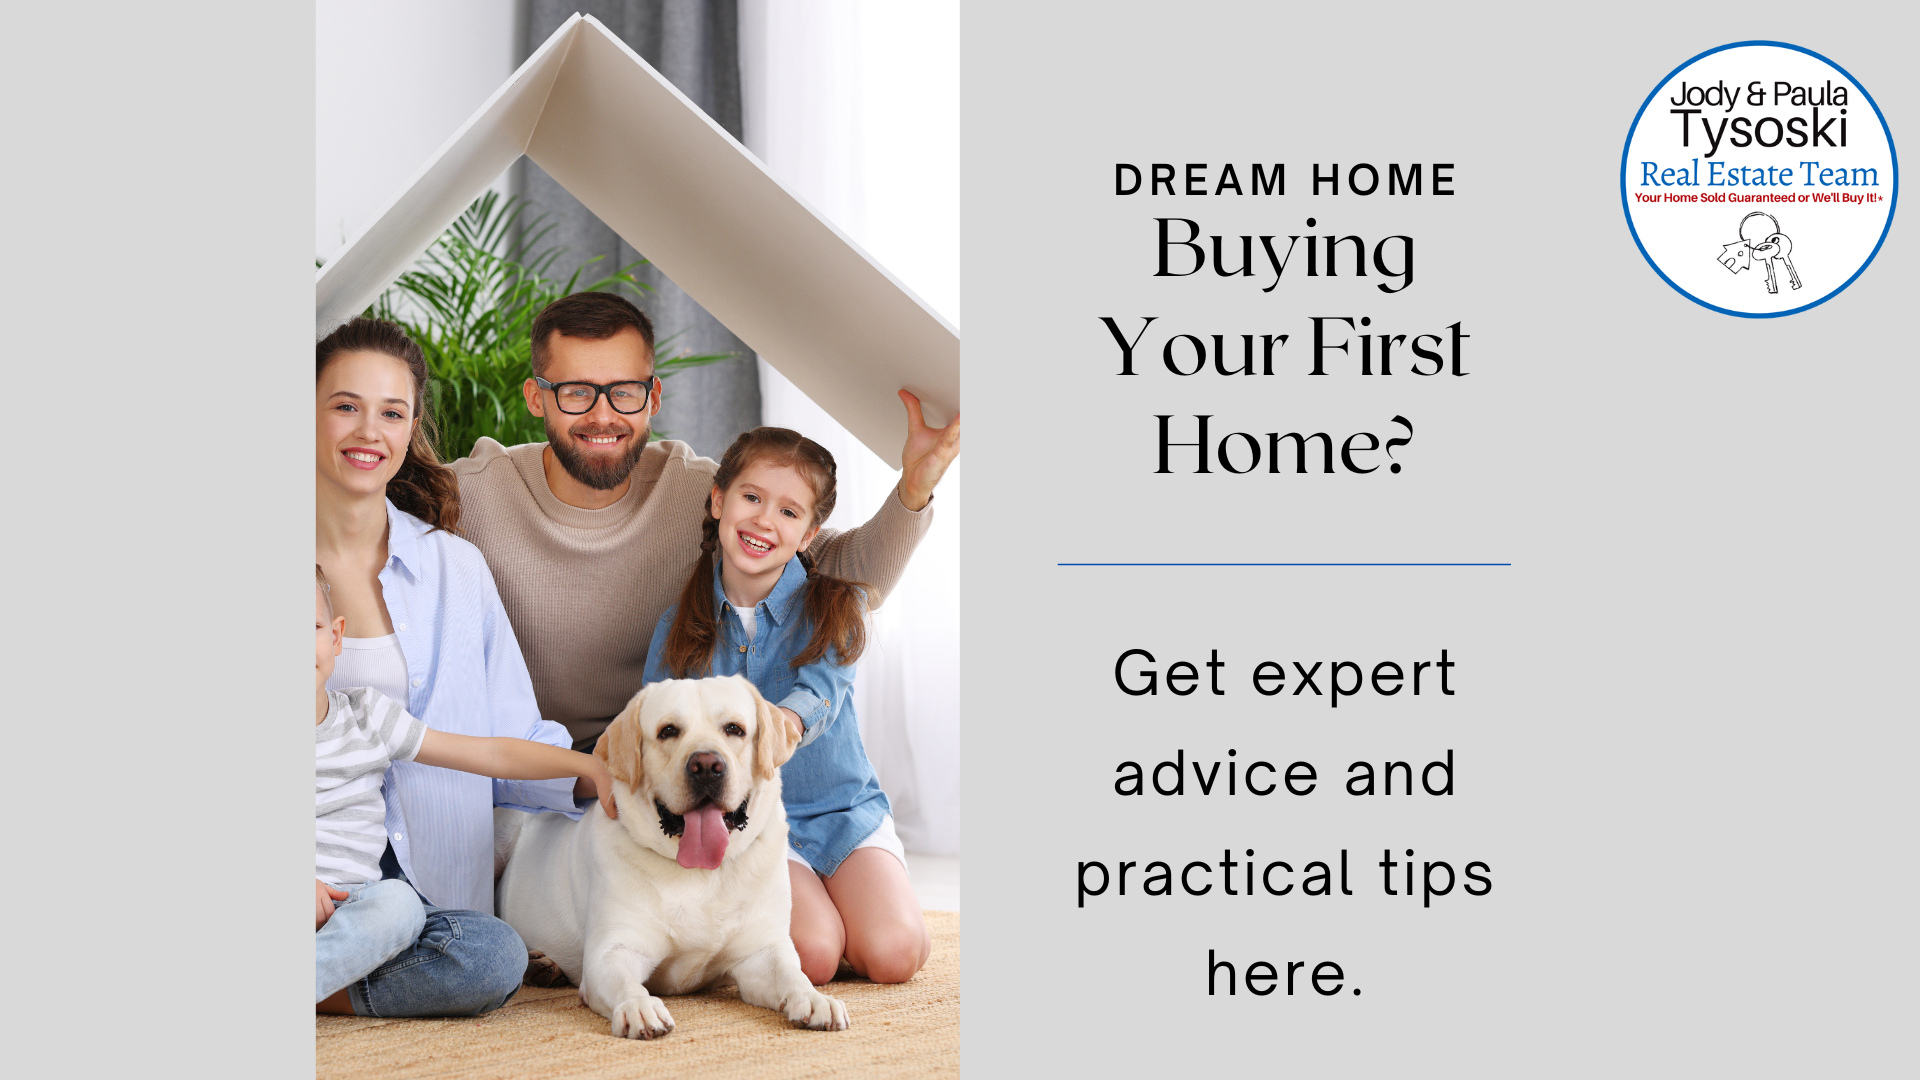 First Time Buyers Incentives - arrange your 5% downpayment